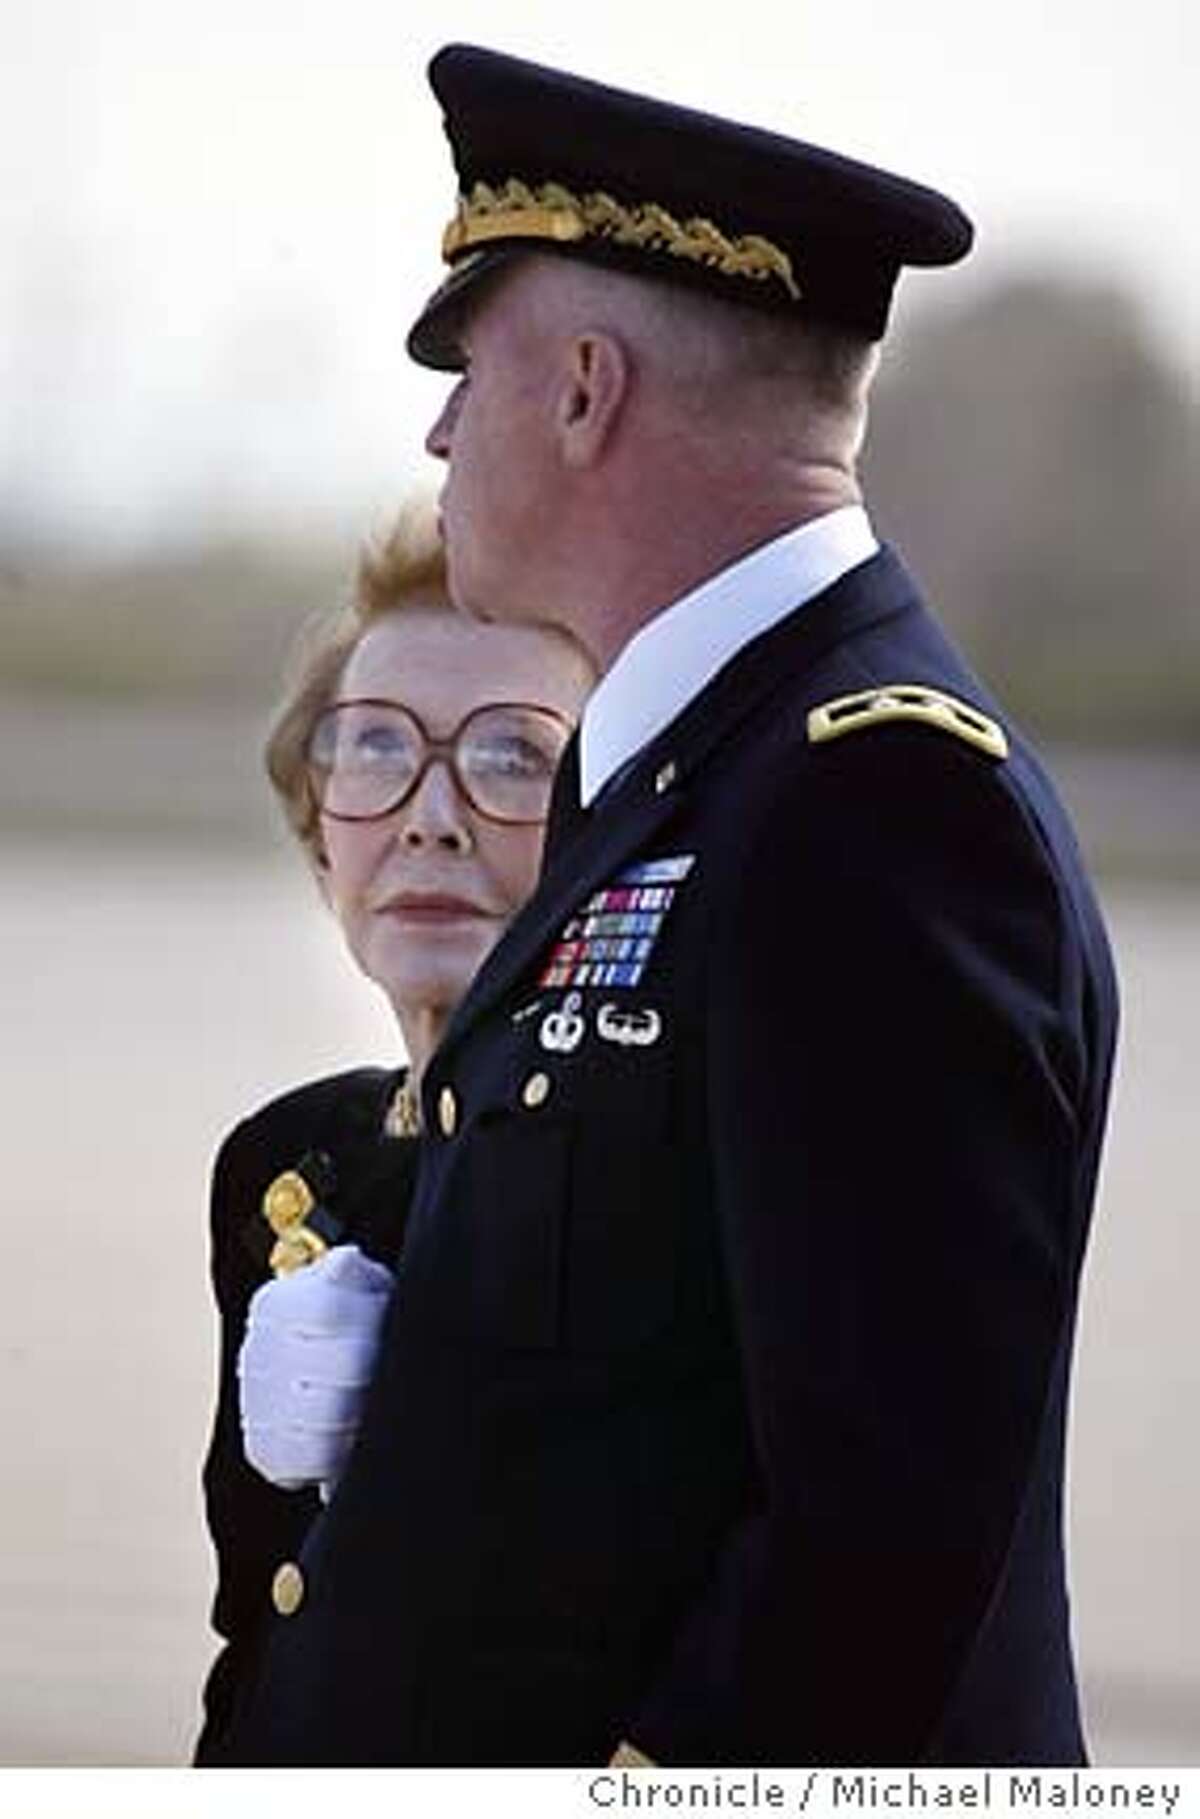 Former First Lady Nancy Reagan and Maj. Gen. Galen B. Jackman, Commanding General, US Army Military District of Washington, Washington, DC. wait as the casket is removed from the hearse. The casket of former President Ronald Reagan along with his family departed Naval Base Ventura County in Point Mugu on a presidential aircraft, enroute to Andrews Air Force Base near Washington DC. After lying in state at the Capitol Rotunda and a national and state funeral ceremonies, the casket will be flown back to the Presidential Library in Simi Valley, CA for burial on Friday. Photo by Michael Maloney / San Francisco Chronicle